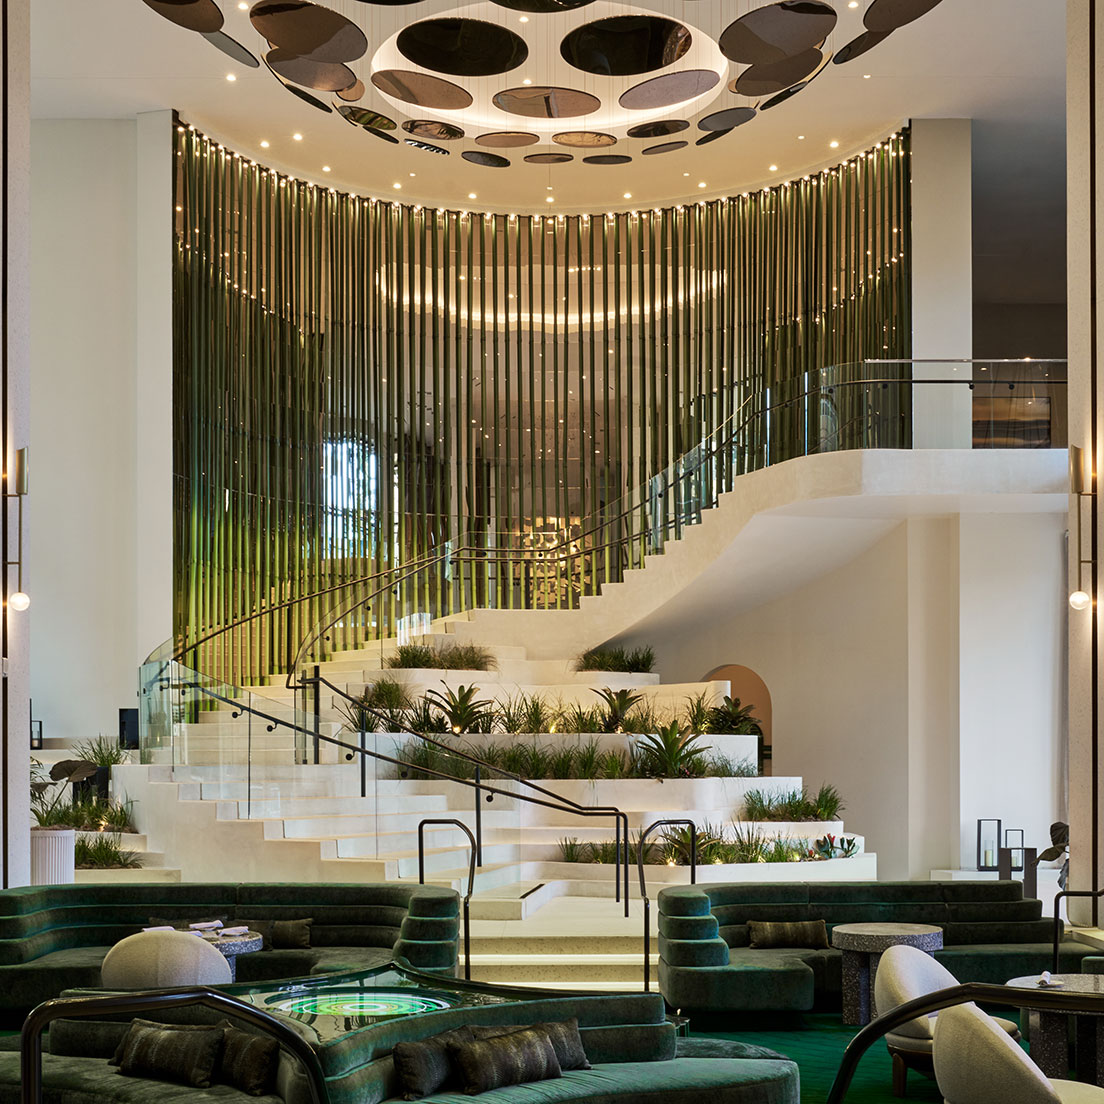 A modern, luxurious lobby with a grand staircase featuring lush greenery. The staircase has glass railings and leads to a mezzanine adorned with vertical metal rods and circular lighting fixtures on the ceiling. Sofa seating area and lush plants decorate the space.